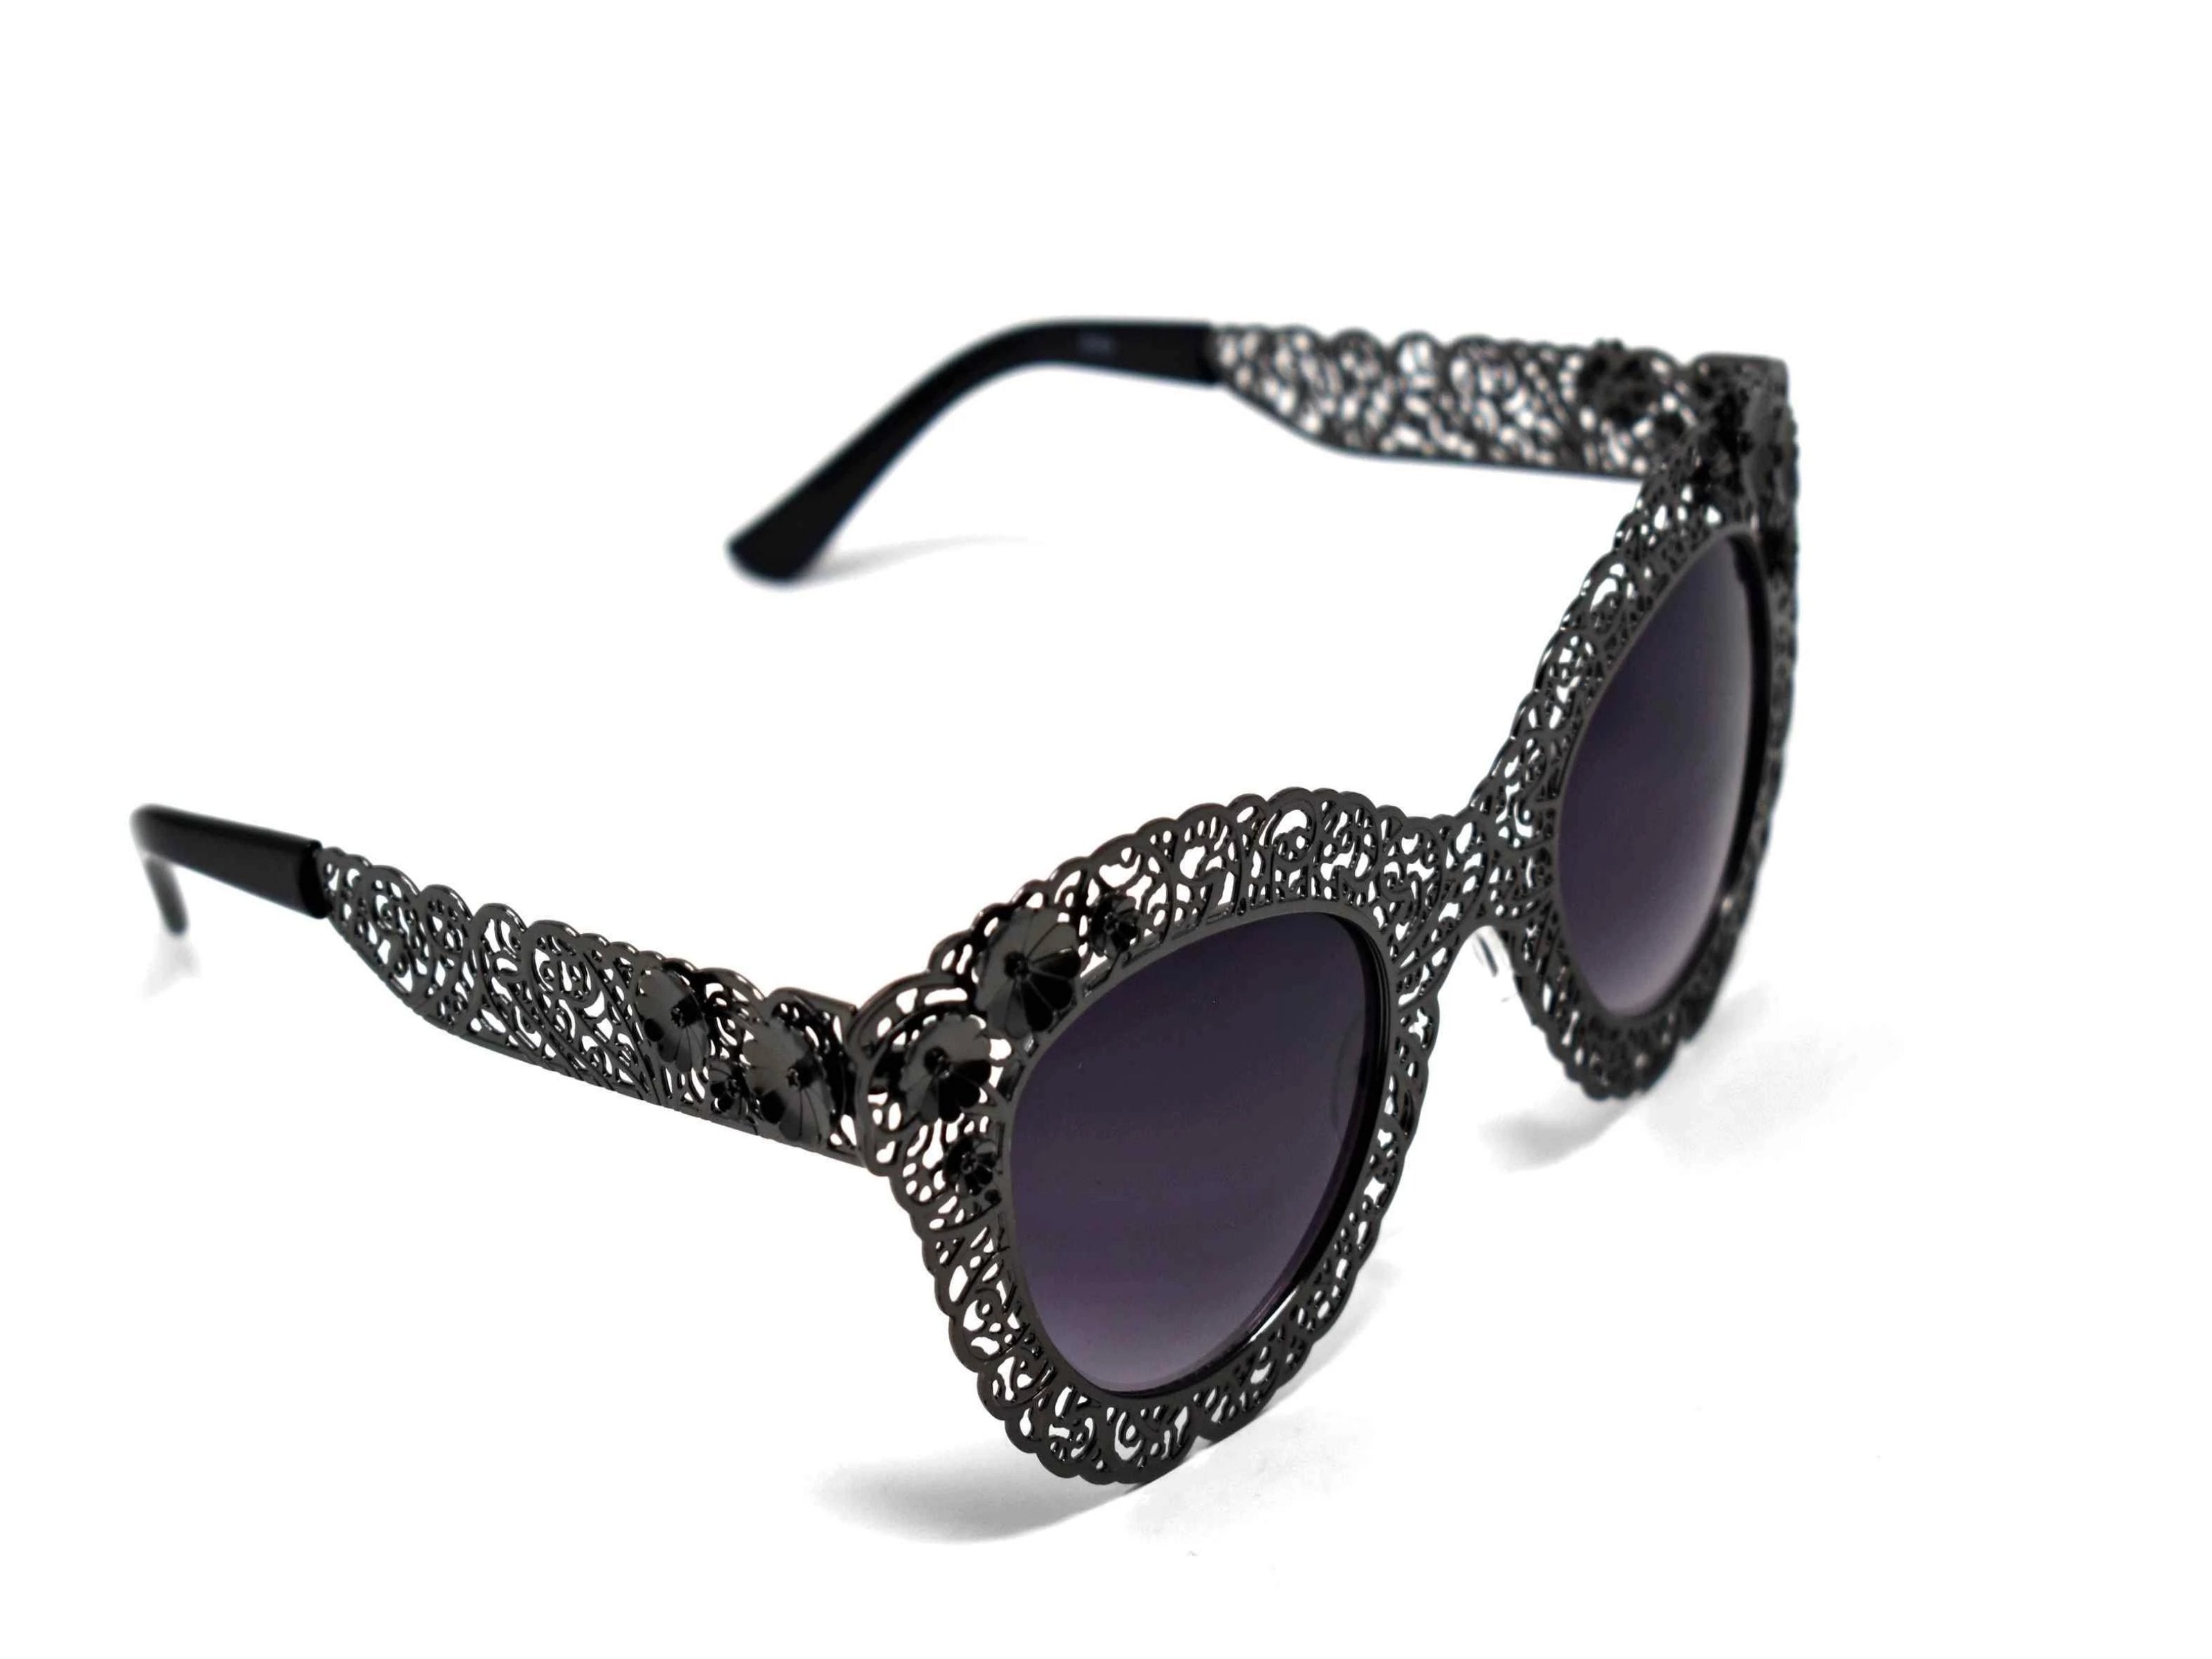 Both dainty and daring be bold in our Cardinal rose dark silver metal frame sunglasses with black lens. 